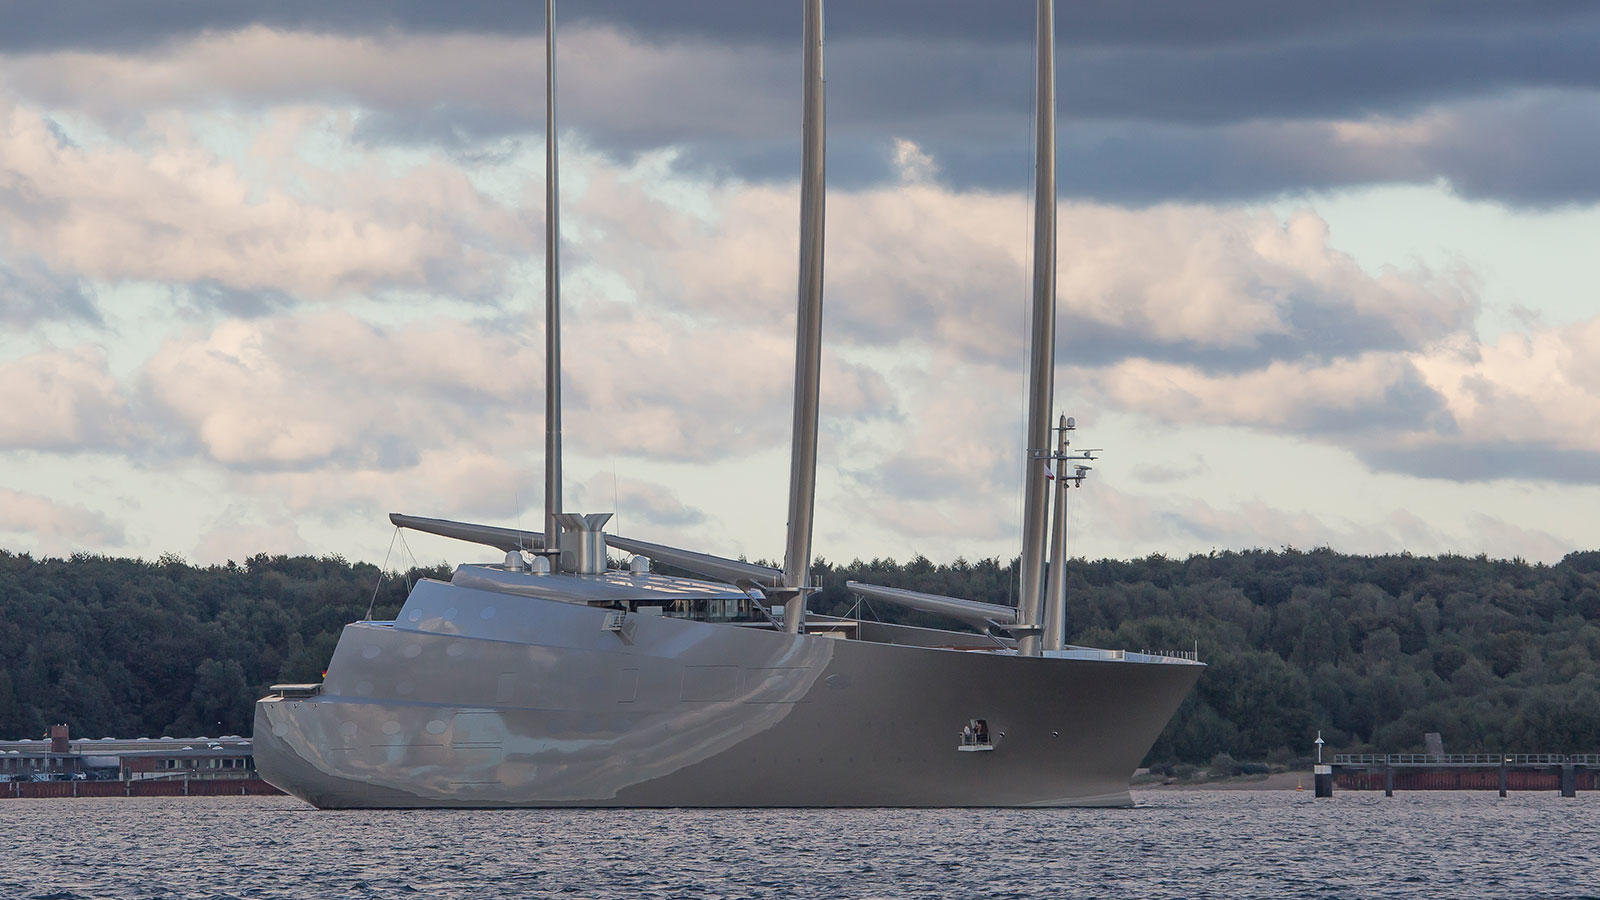 The Superyacht 'Sailing Yacht A' is launched.